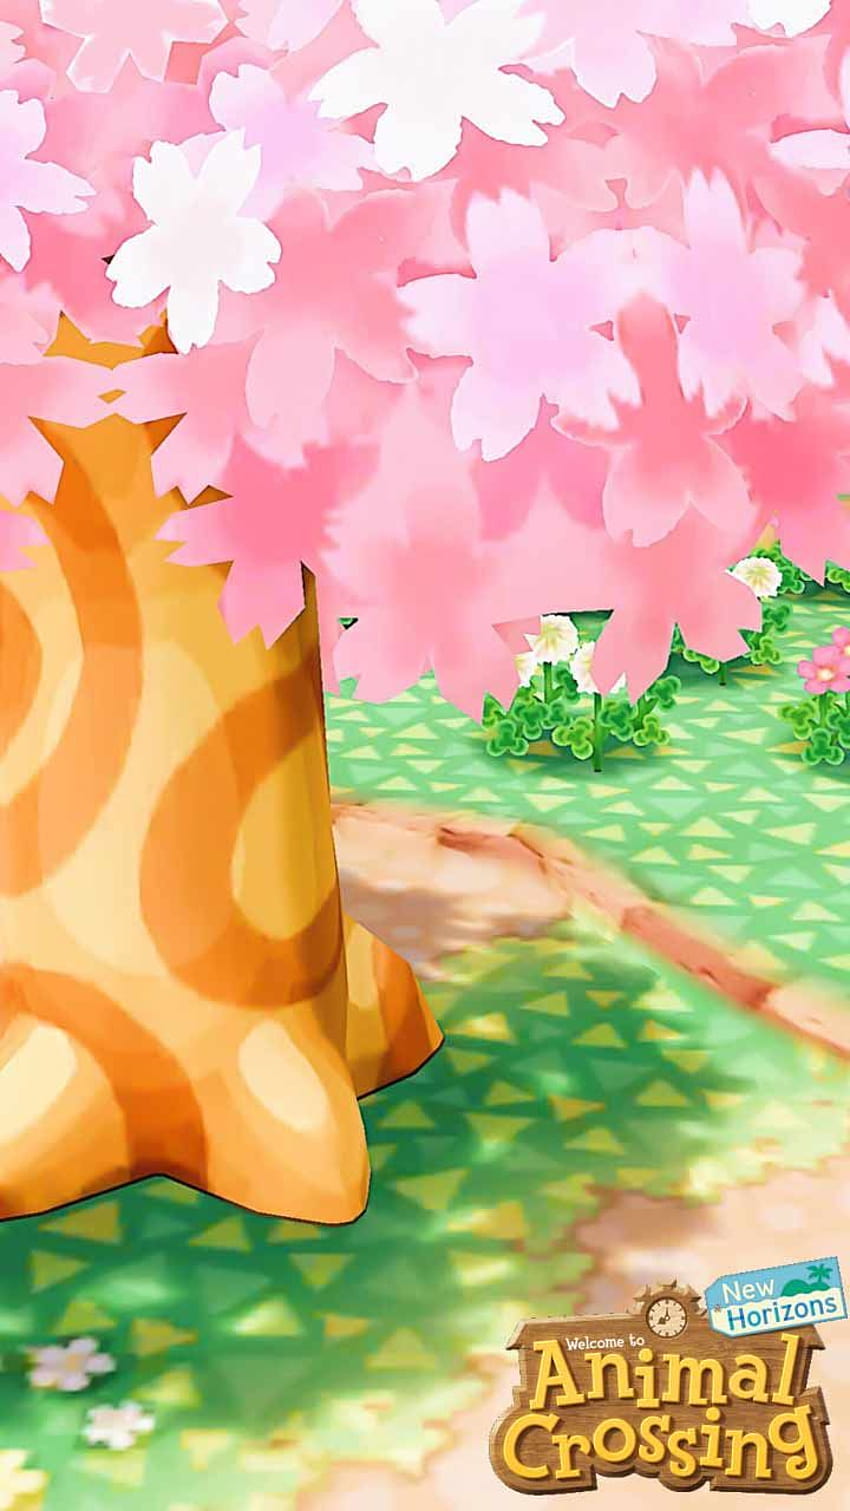 30 Animal Crossing HD Wallpapers and Backgrounds